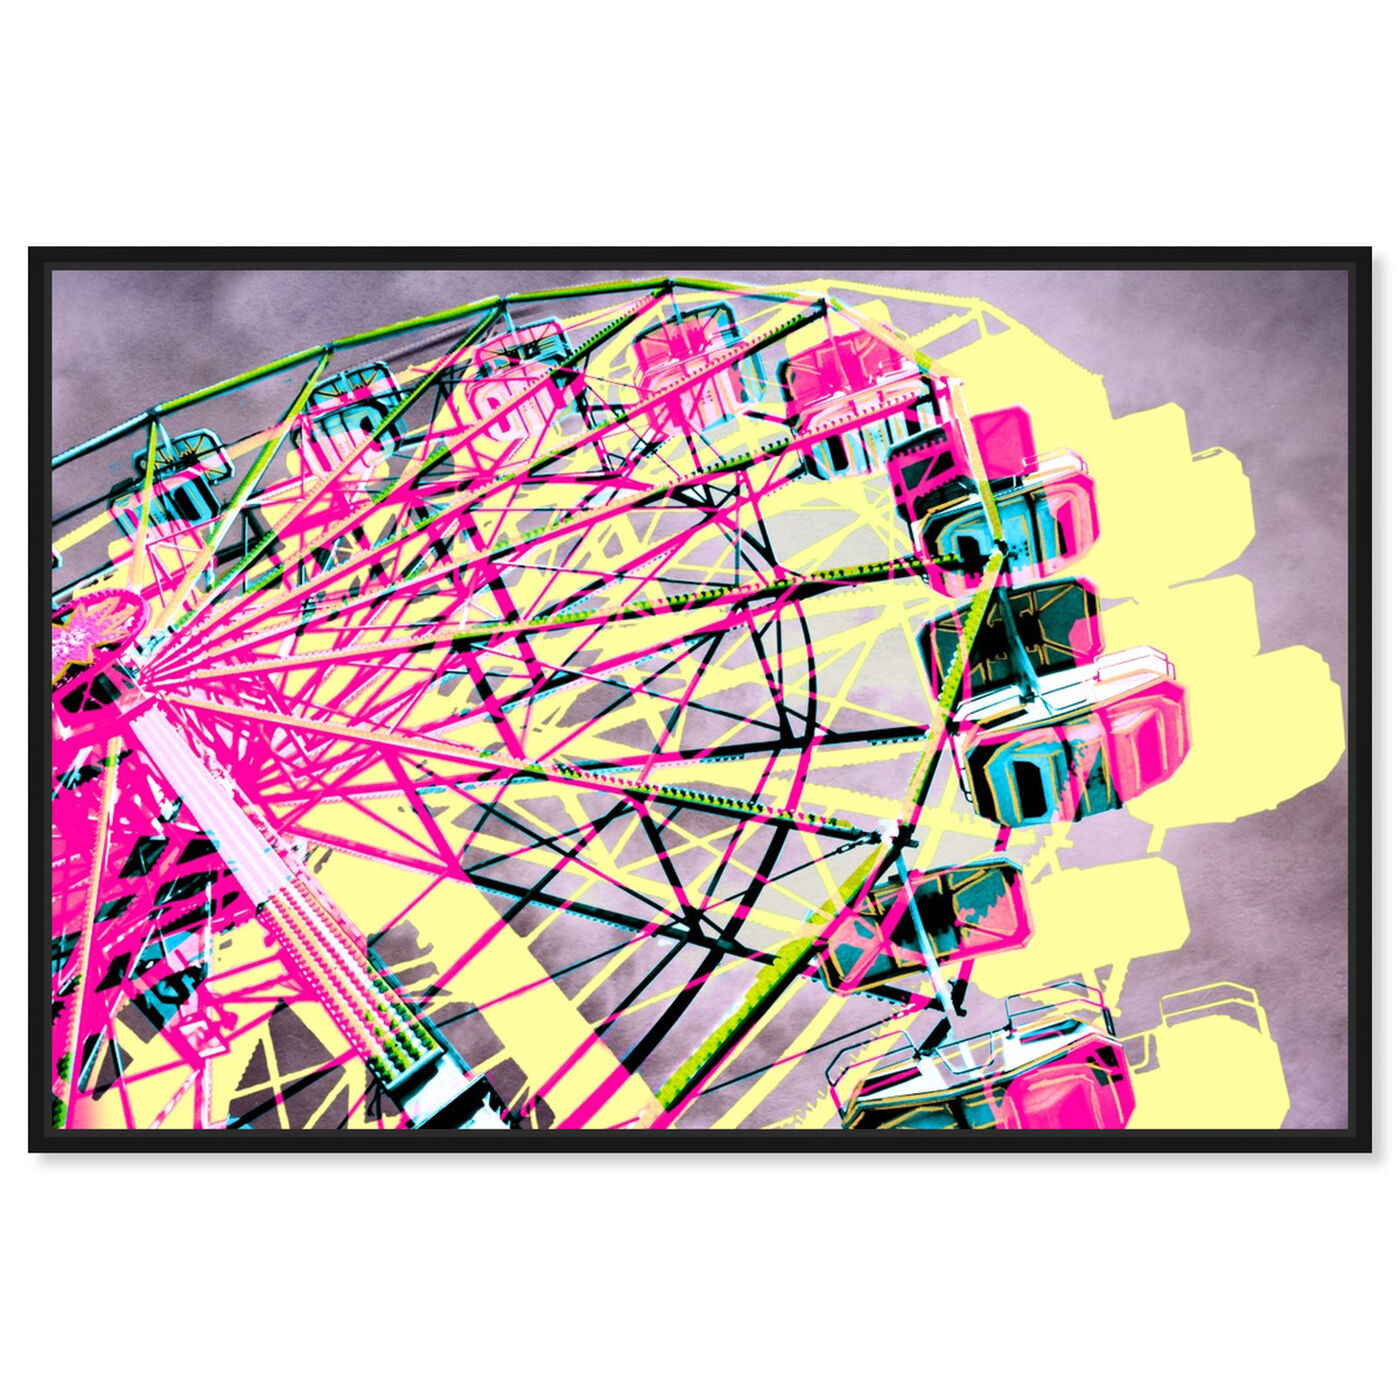 Front view of Ferris Wheel featuring entertainment and hobbies and fairs art.